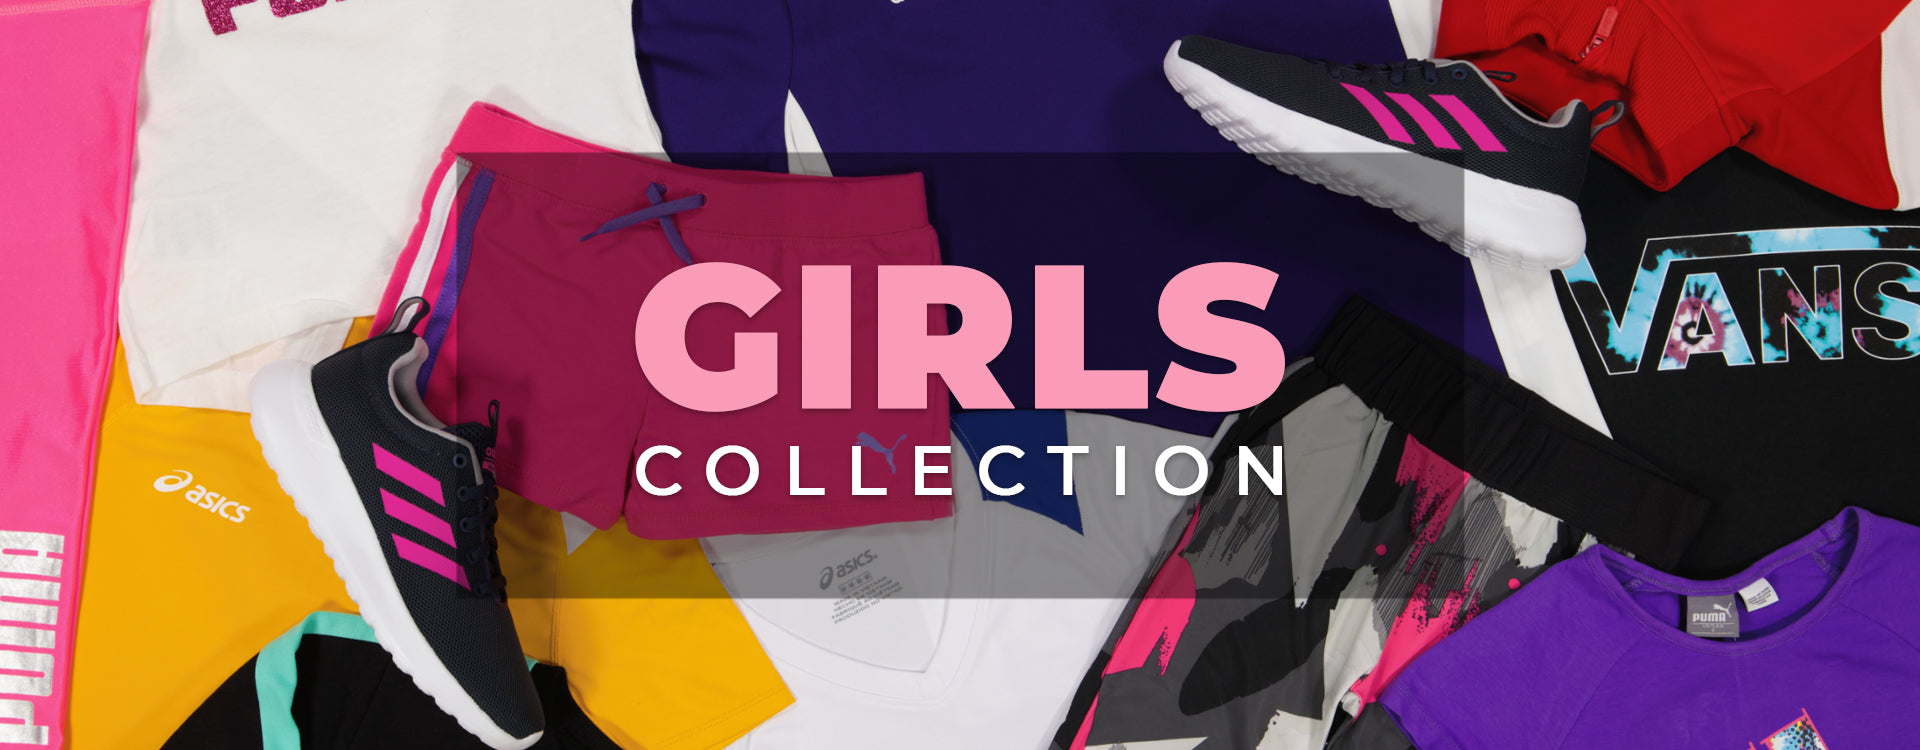 SVP Girl's Collection